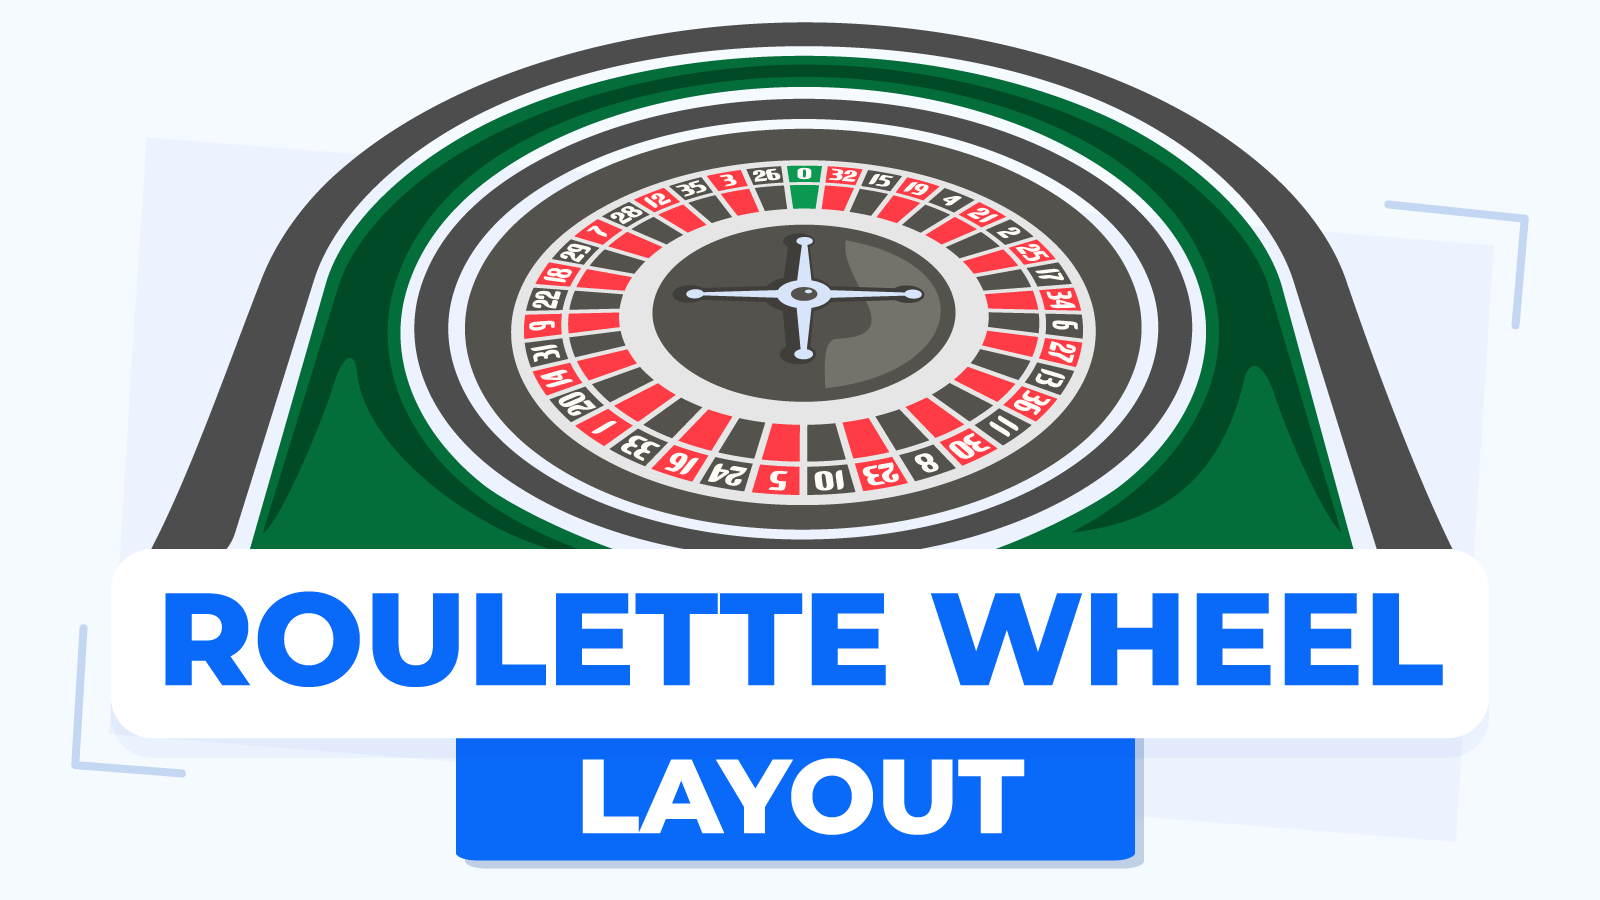 Decipher the Roulette wheel numbers & table with us!